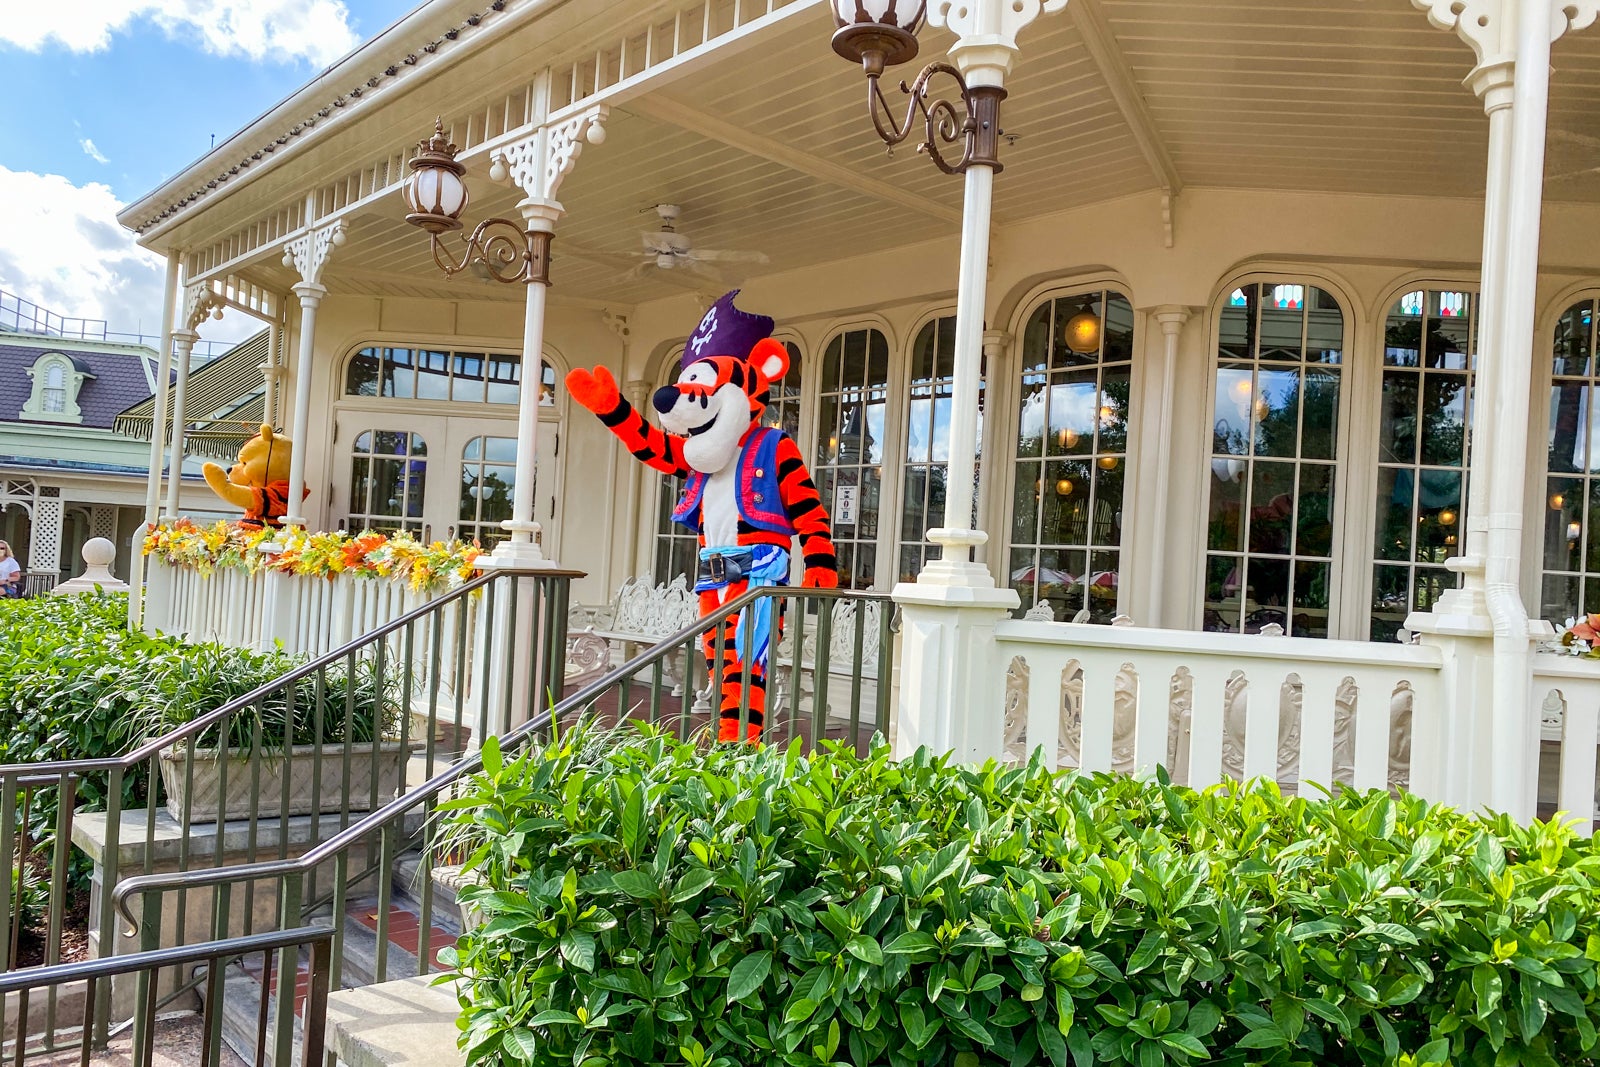 A person dressed up as Tigger in a pirate costume waves from the porch of The Crystal Palace in Walt Disney World